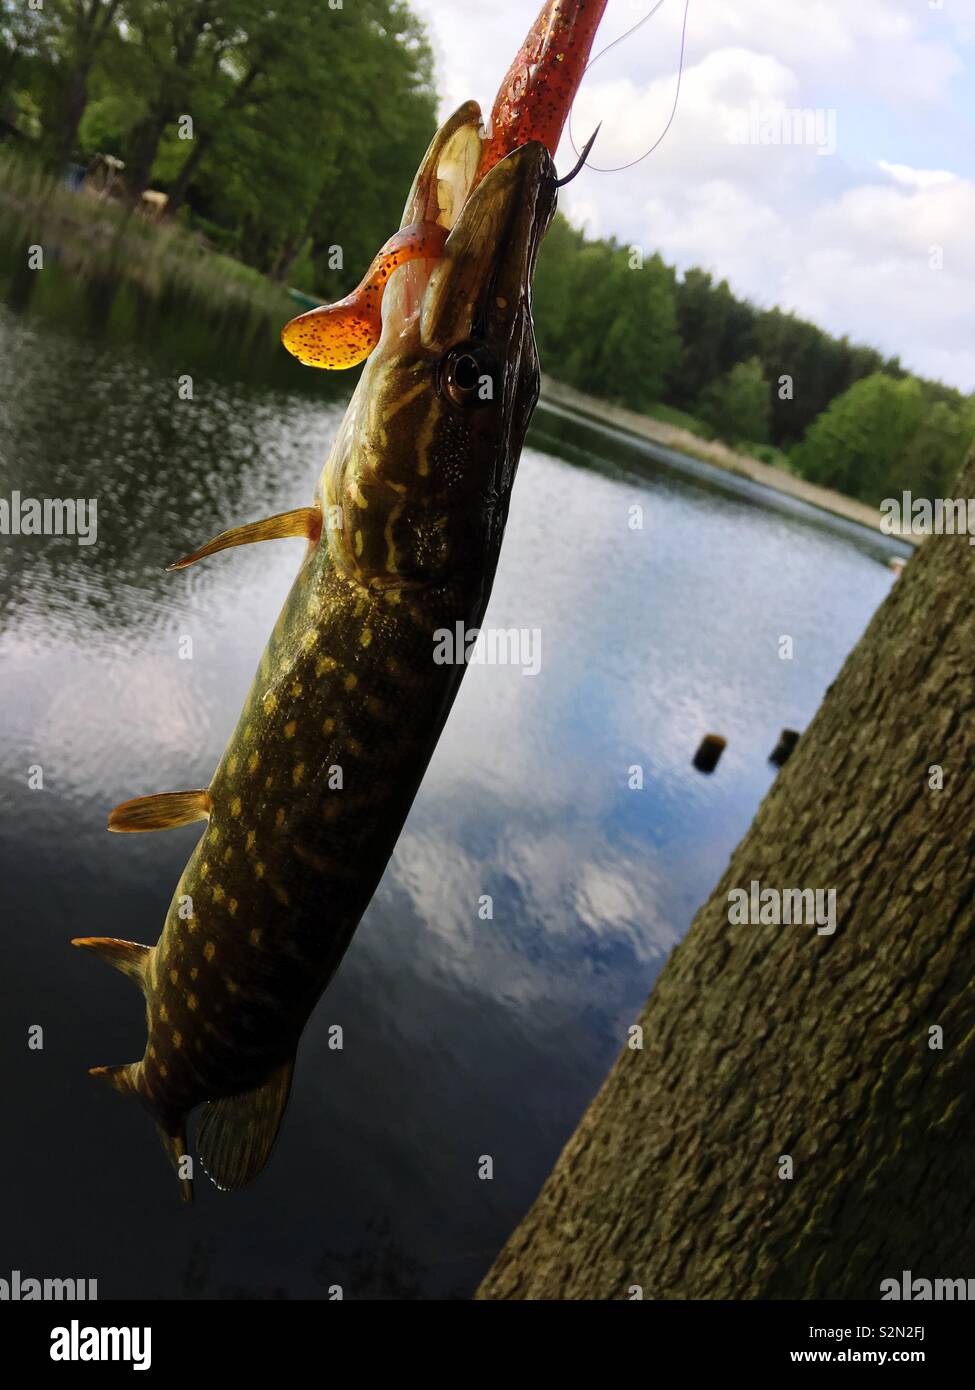 European Pike caught with a rubber fishing lure Stock Photo - Alamy